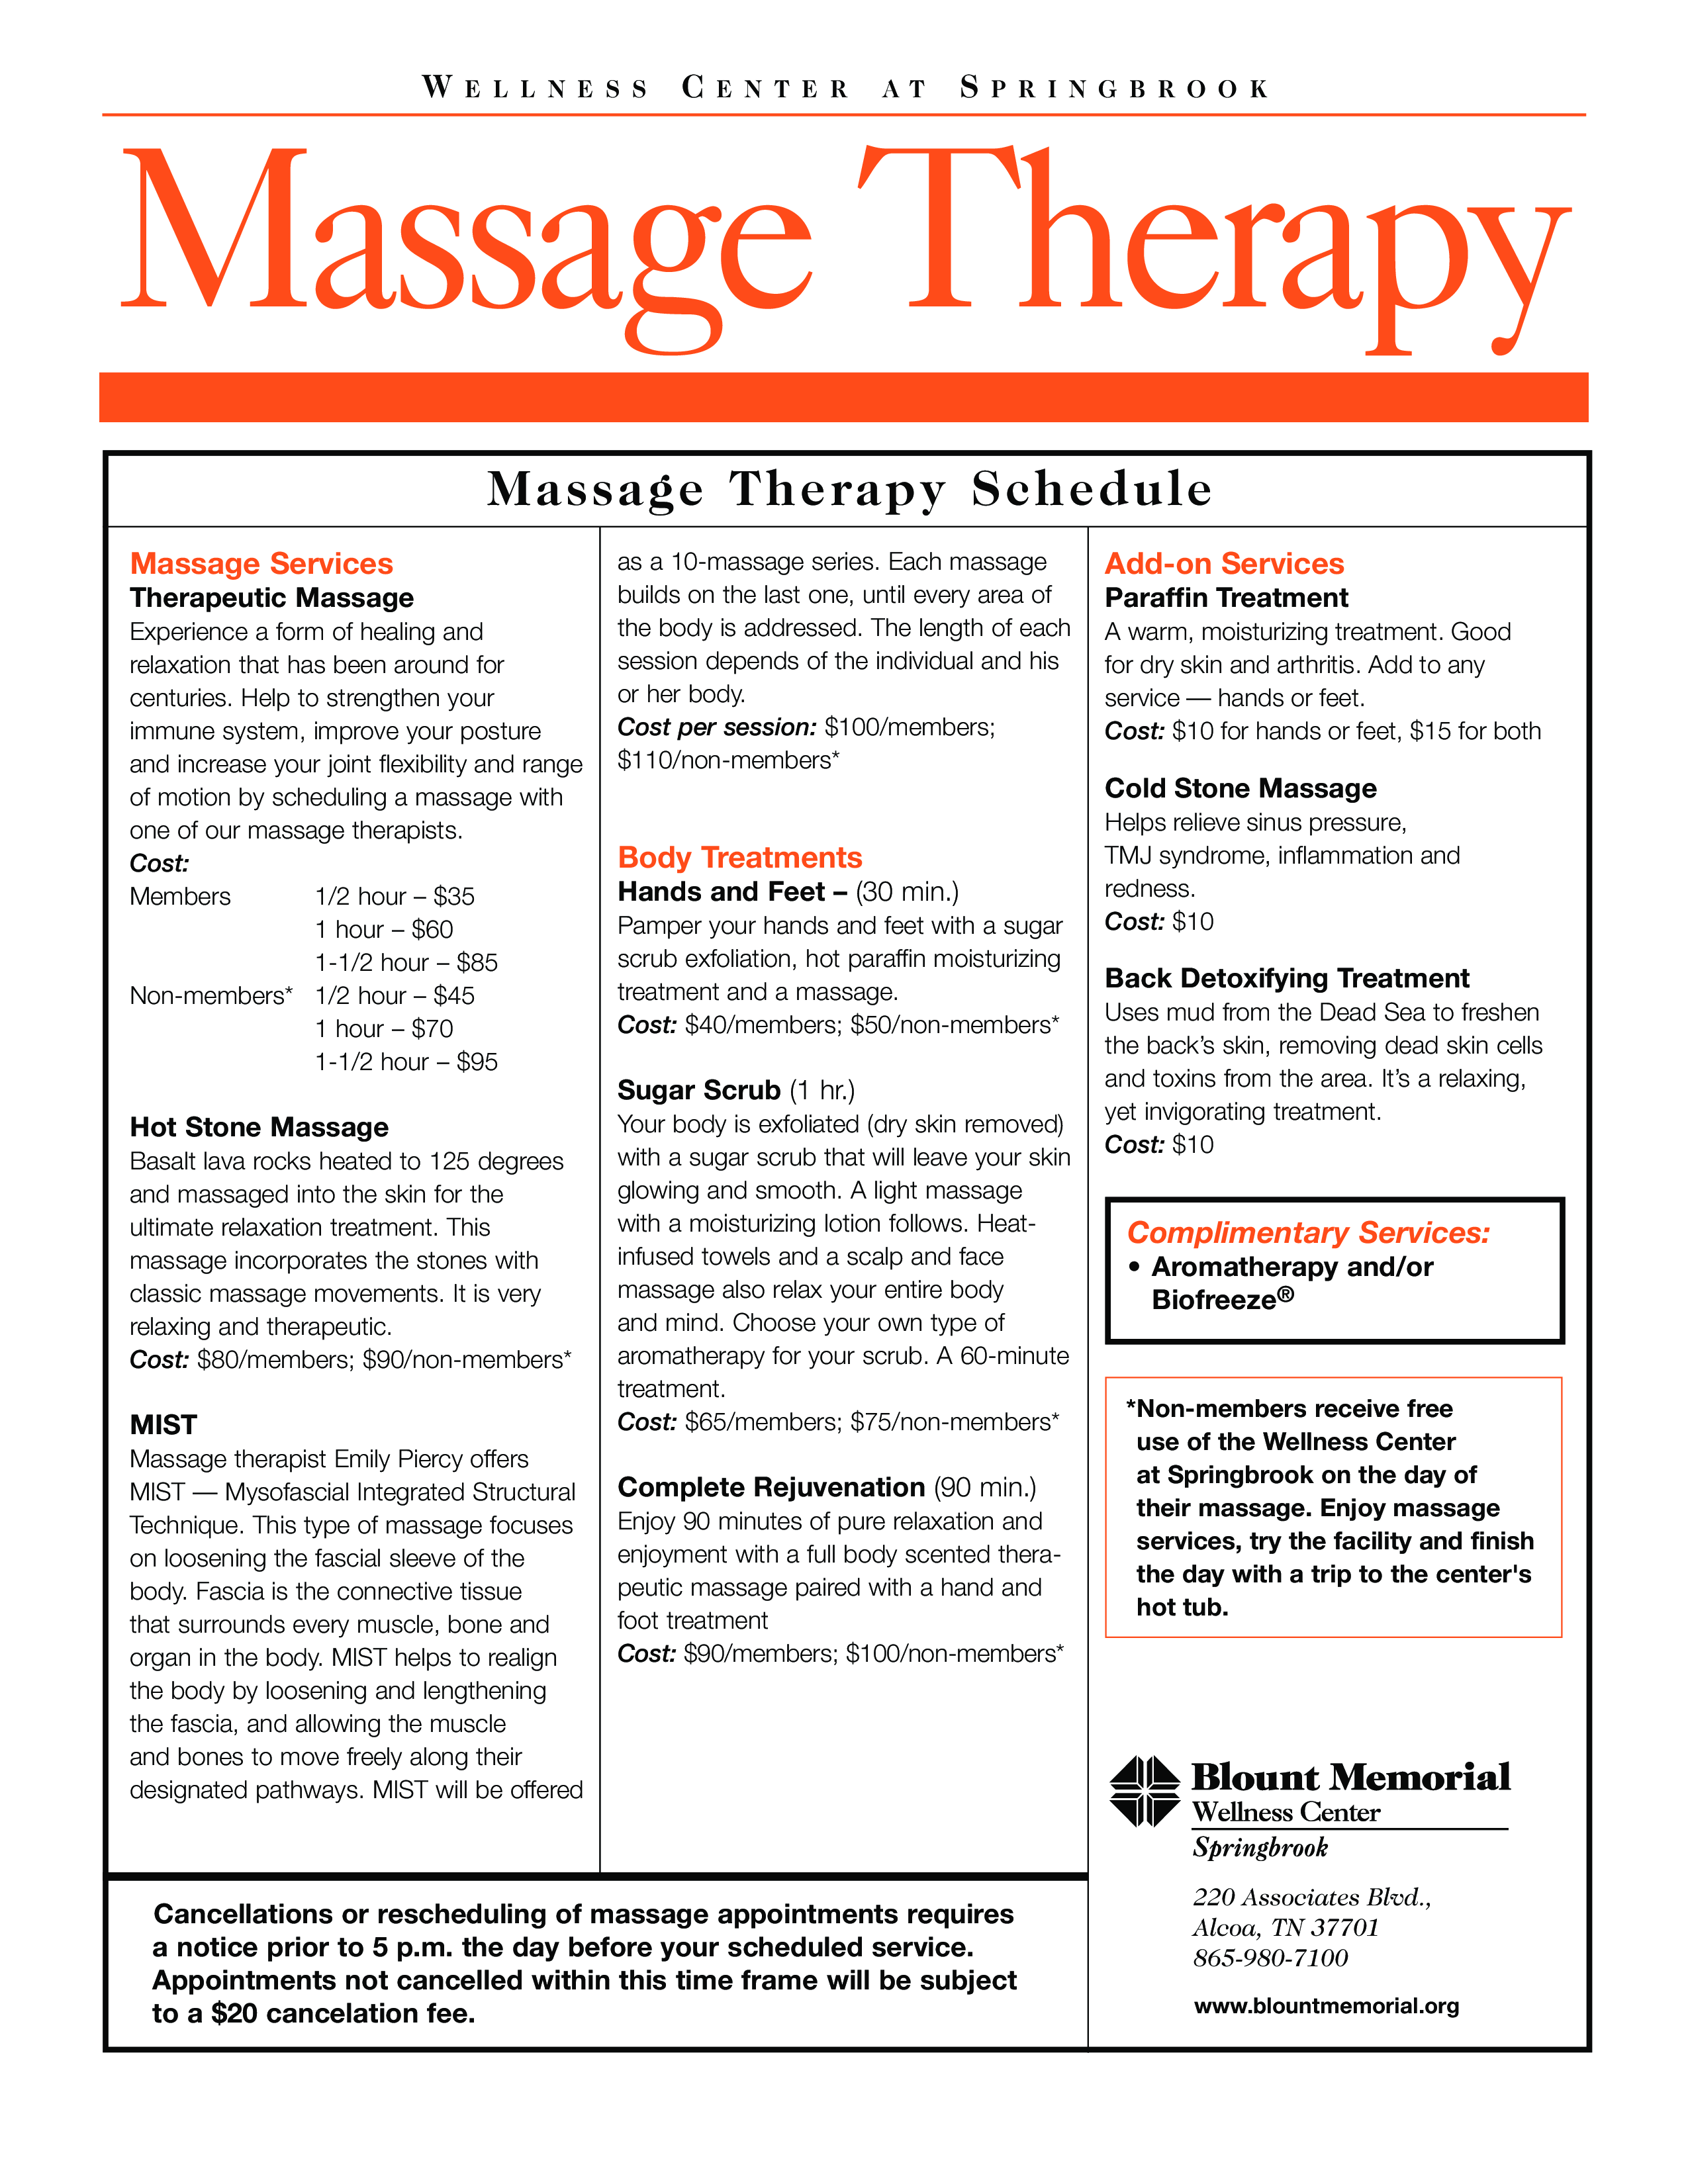 Massage Therapy Schedule main image